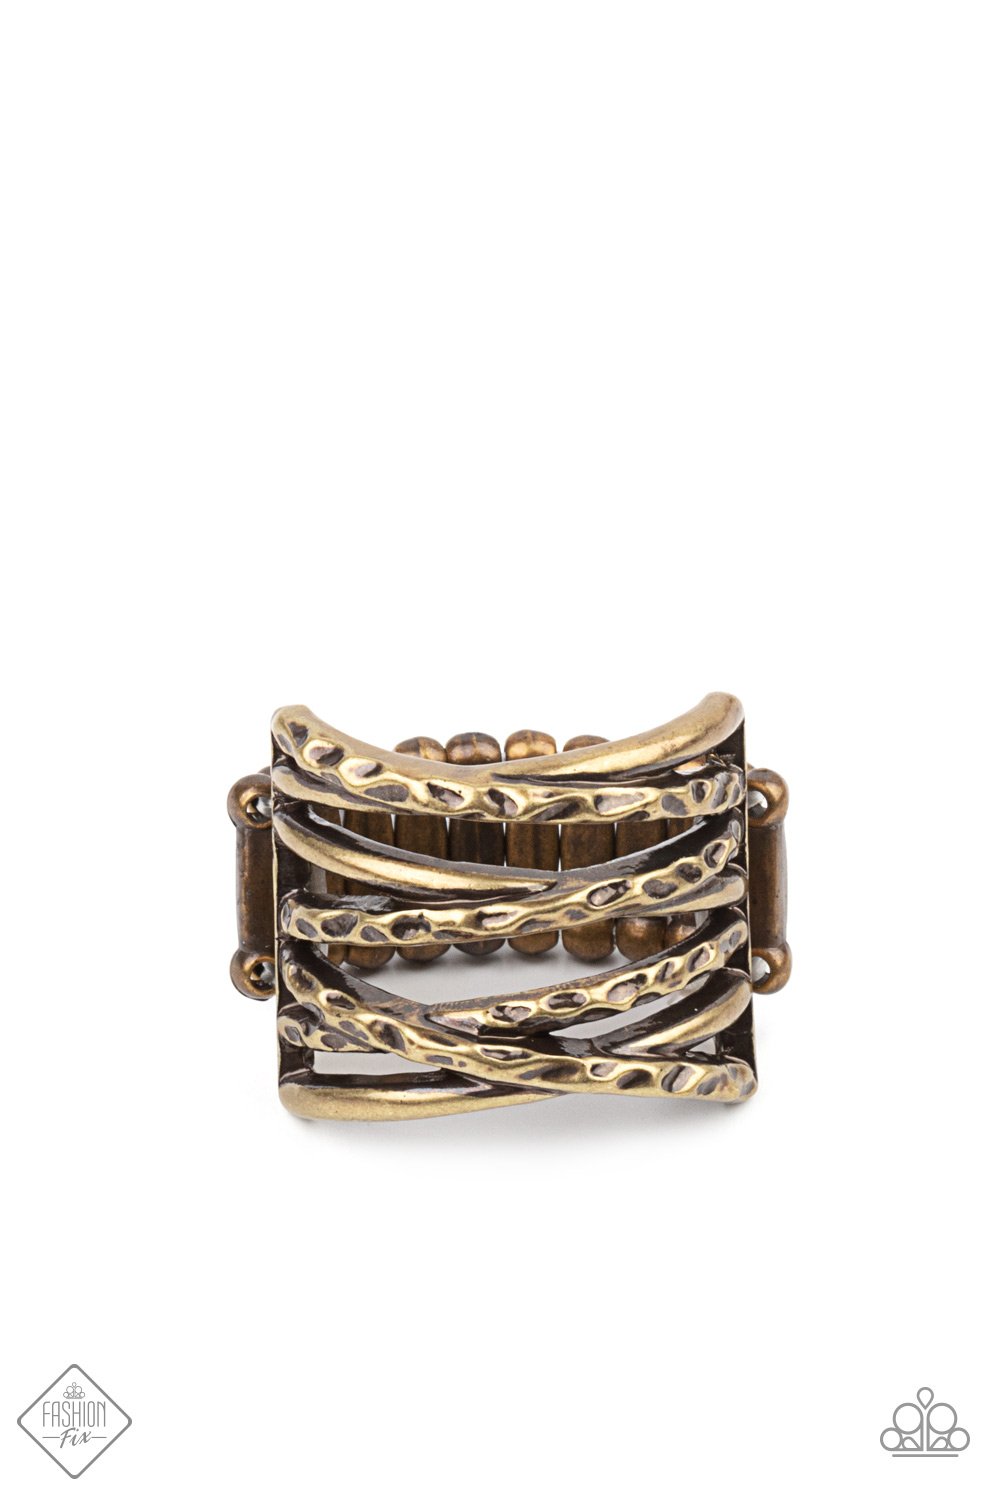 Switching Gears Ring - Brass